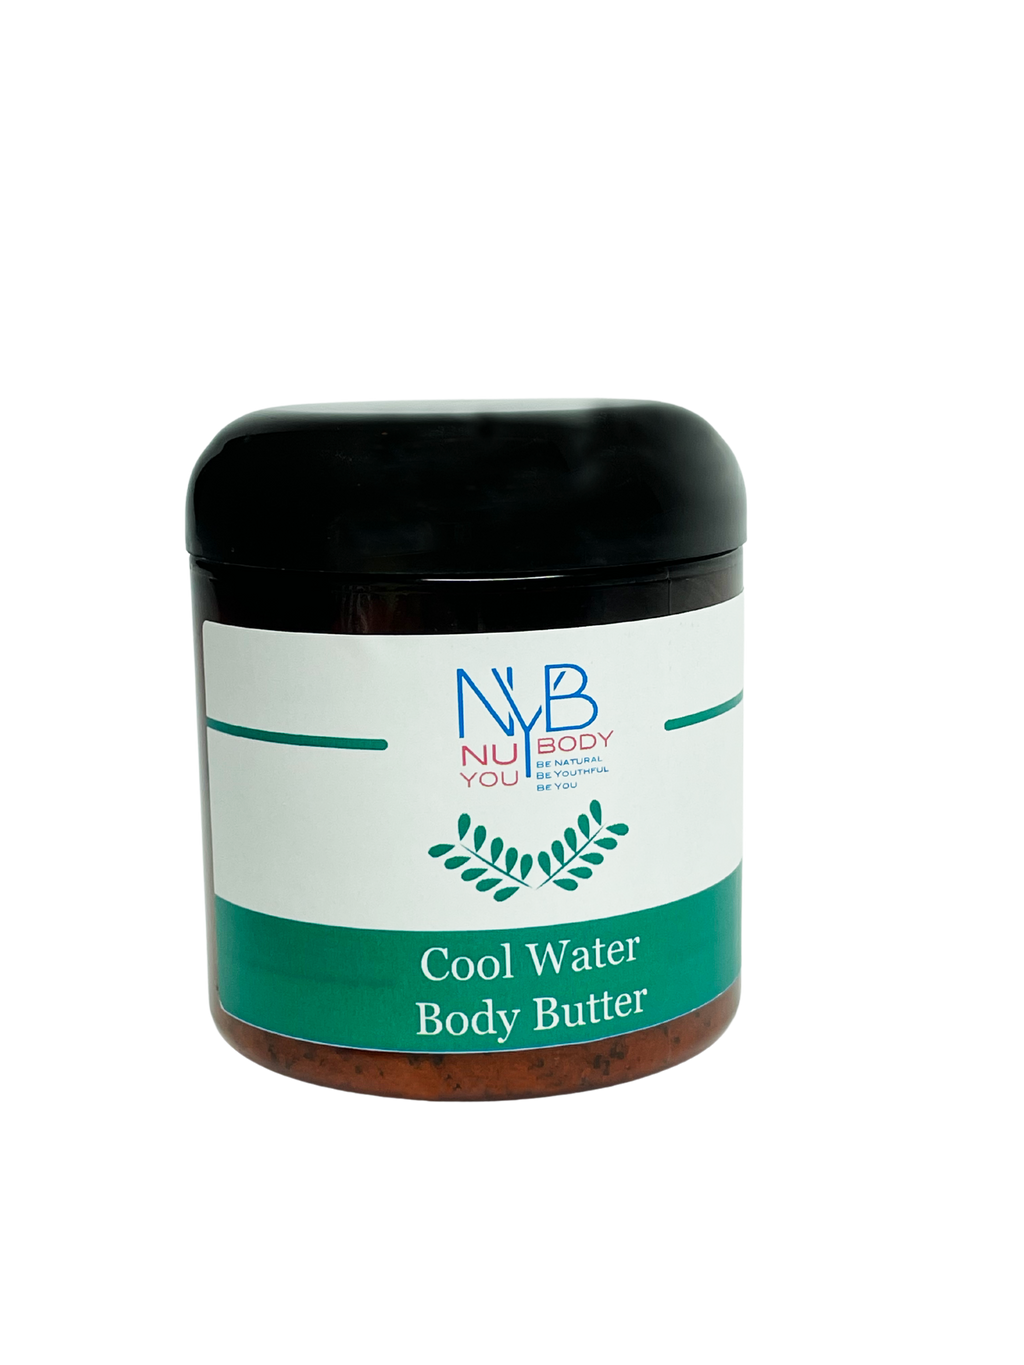 Cool Water Body Butter